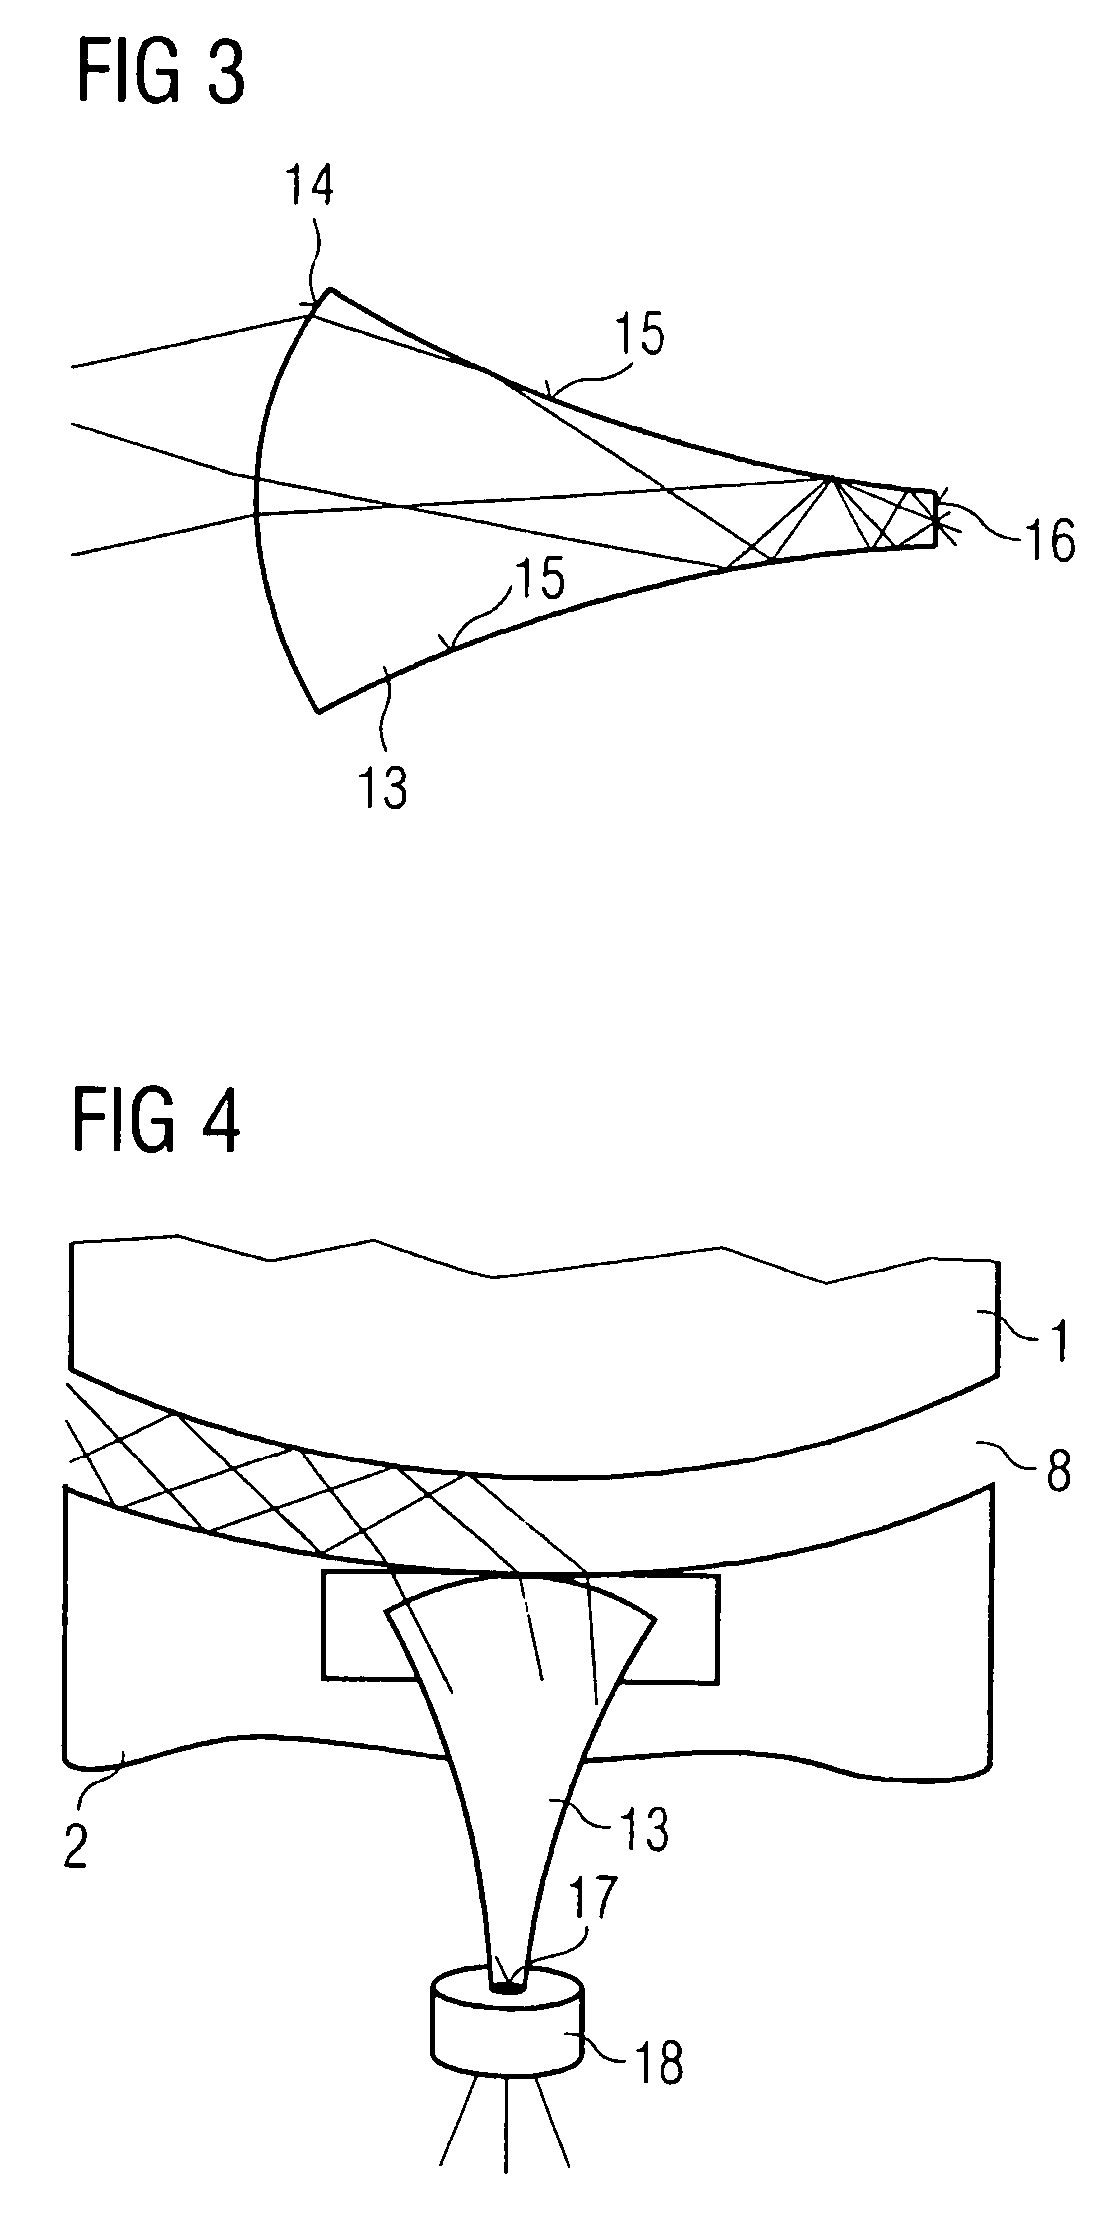 Apparatus to transfer optical signals between a rotating part and a stationary part of a machine